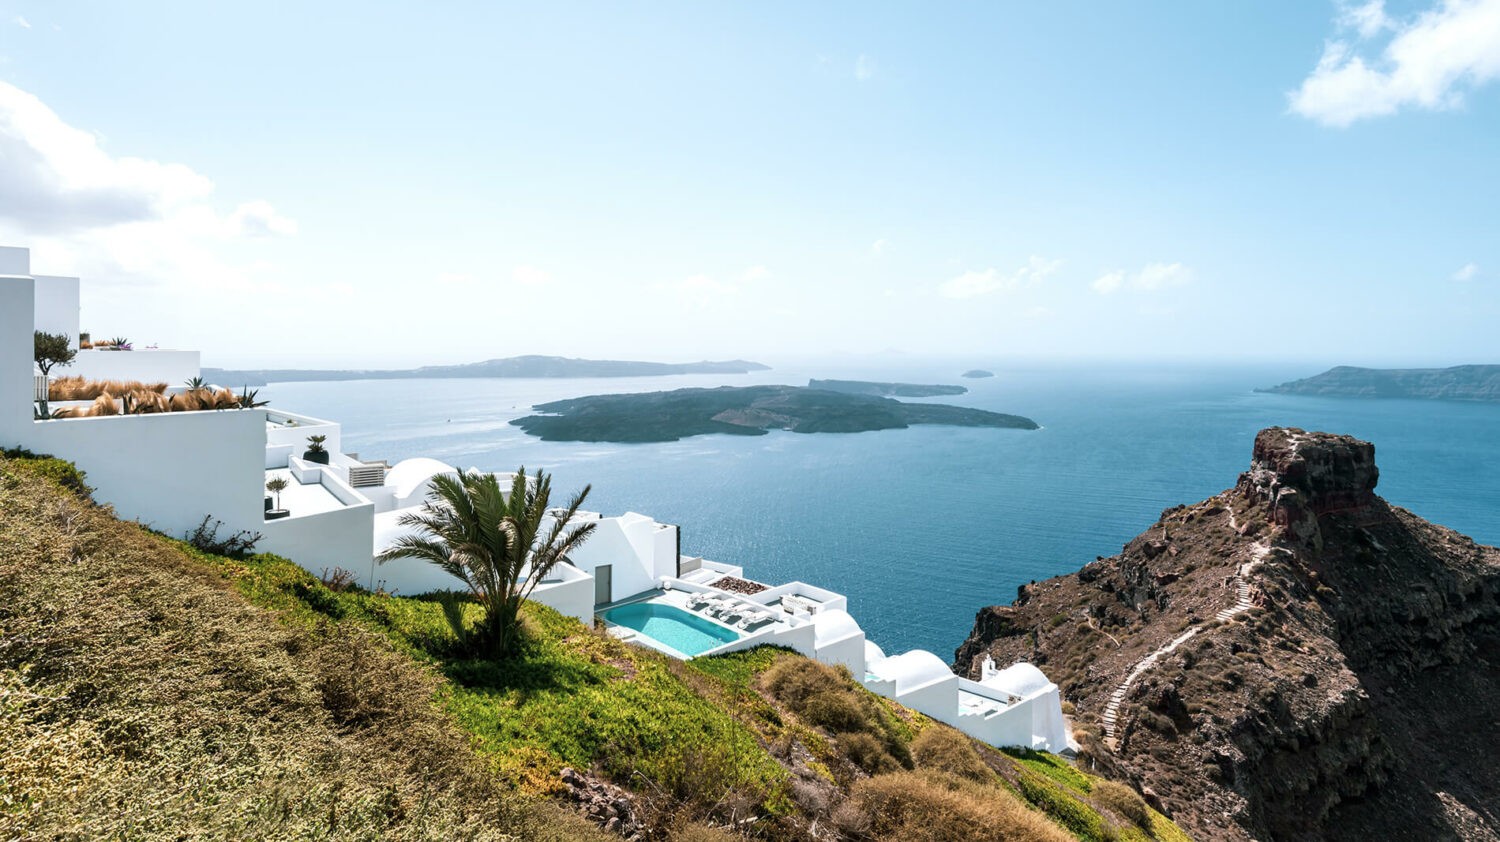 grace hotel, auberge resorts collection greece-hotel-top